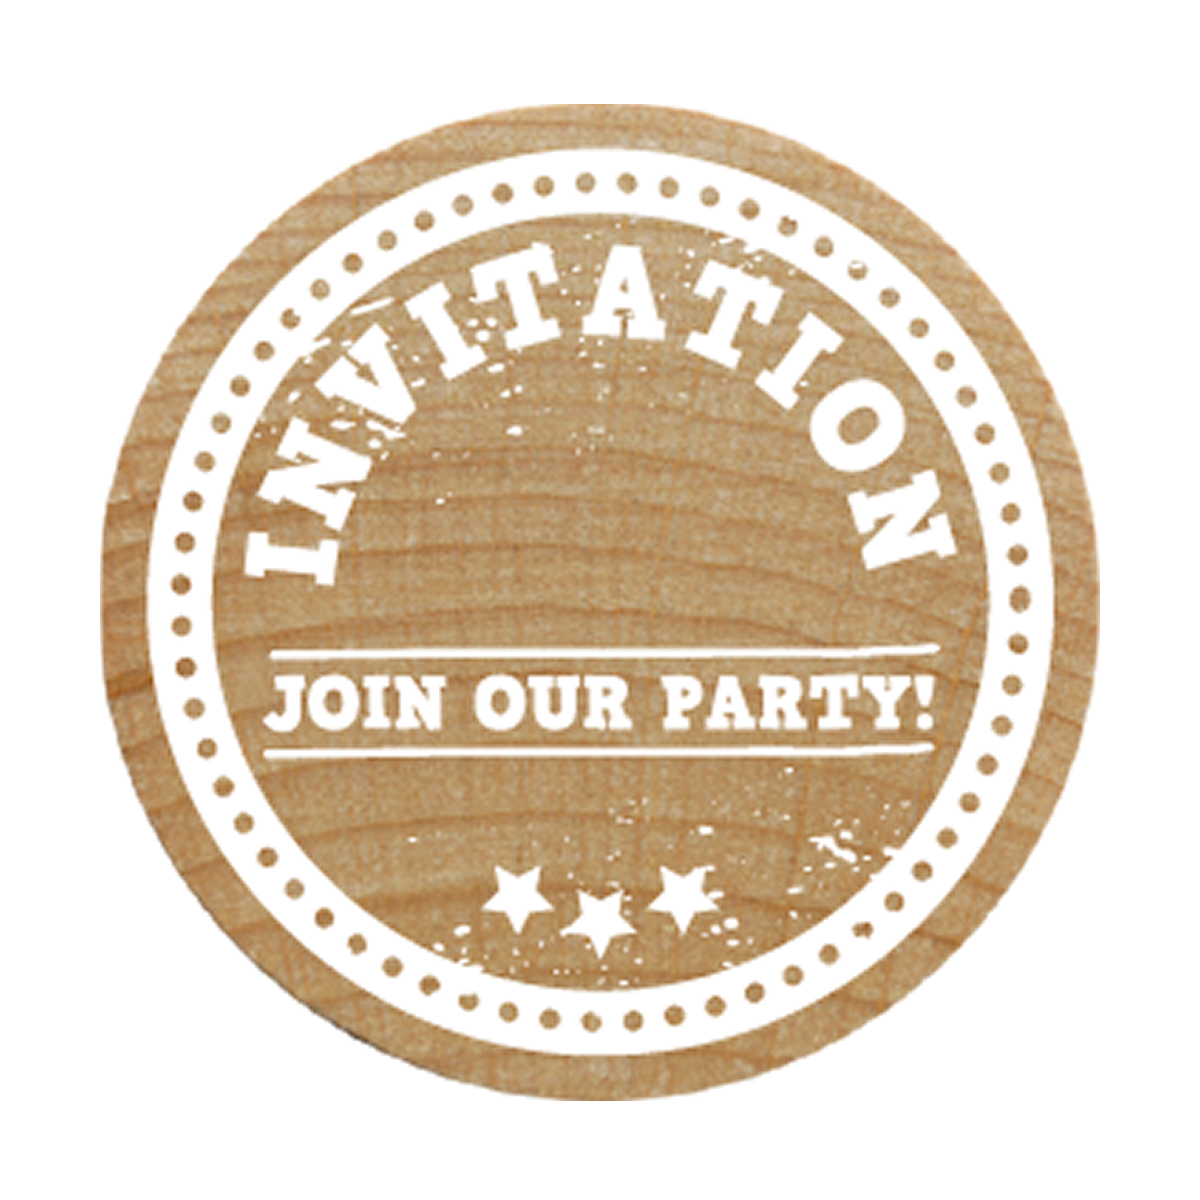 COLOP Arts & Crafts Woodies Ξύλινη Σφραγίδα - Invitation Join our party!